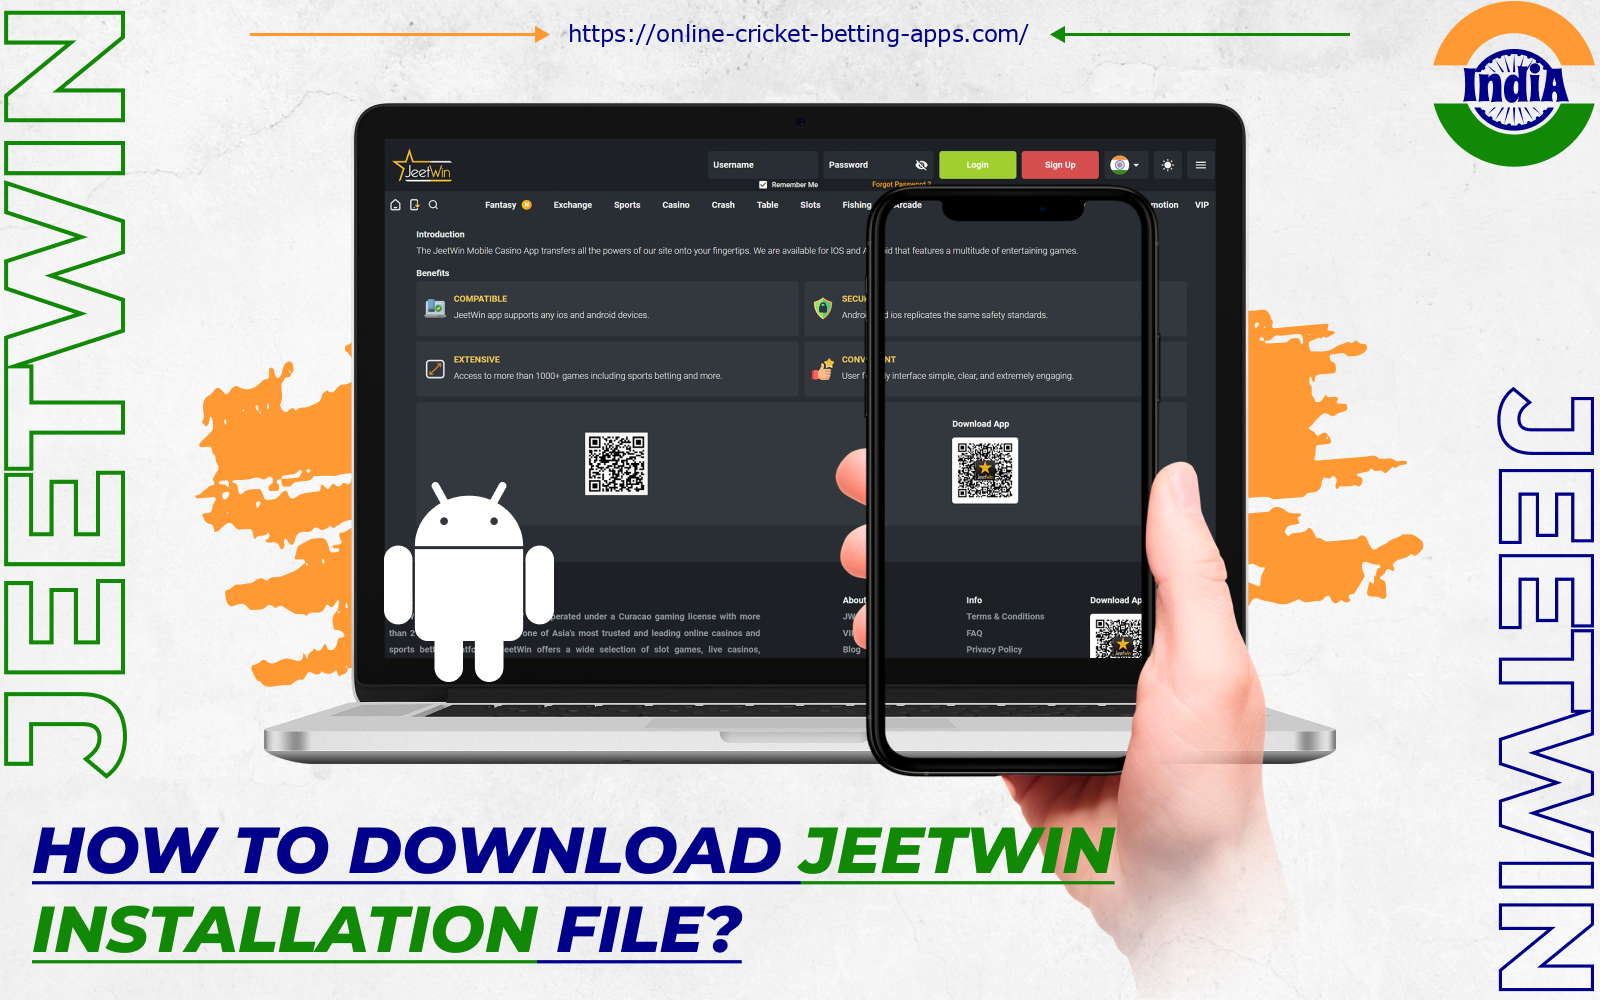 To install the app on Android, a user from India needs to first download the APK of the Jeetwin app